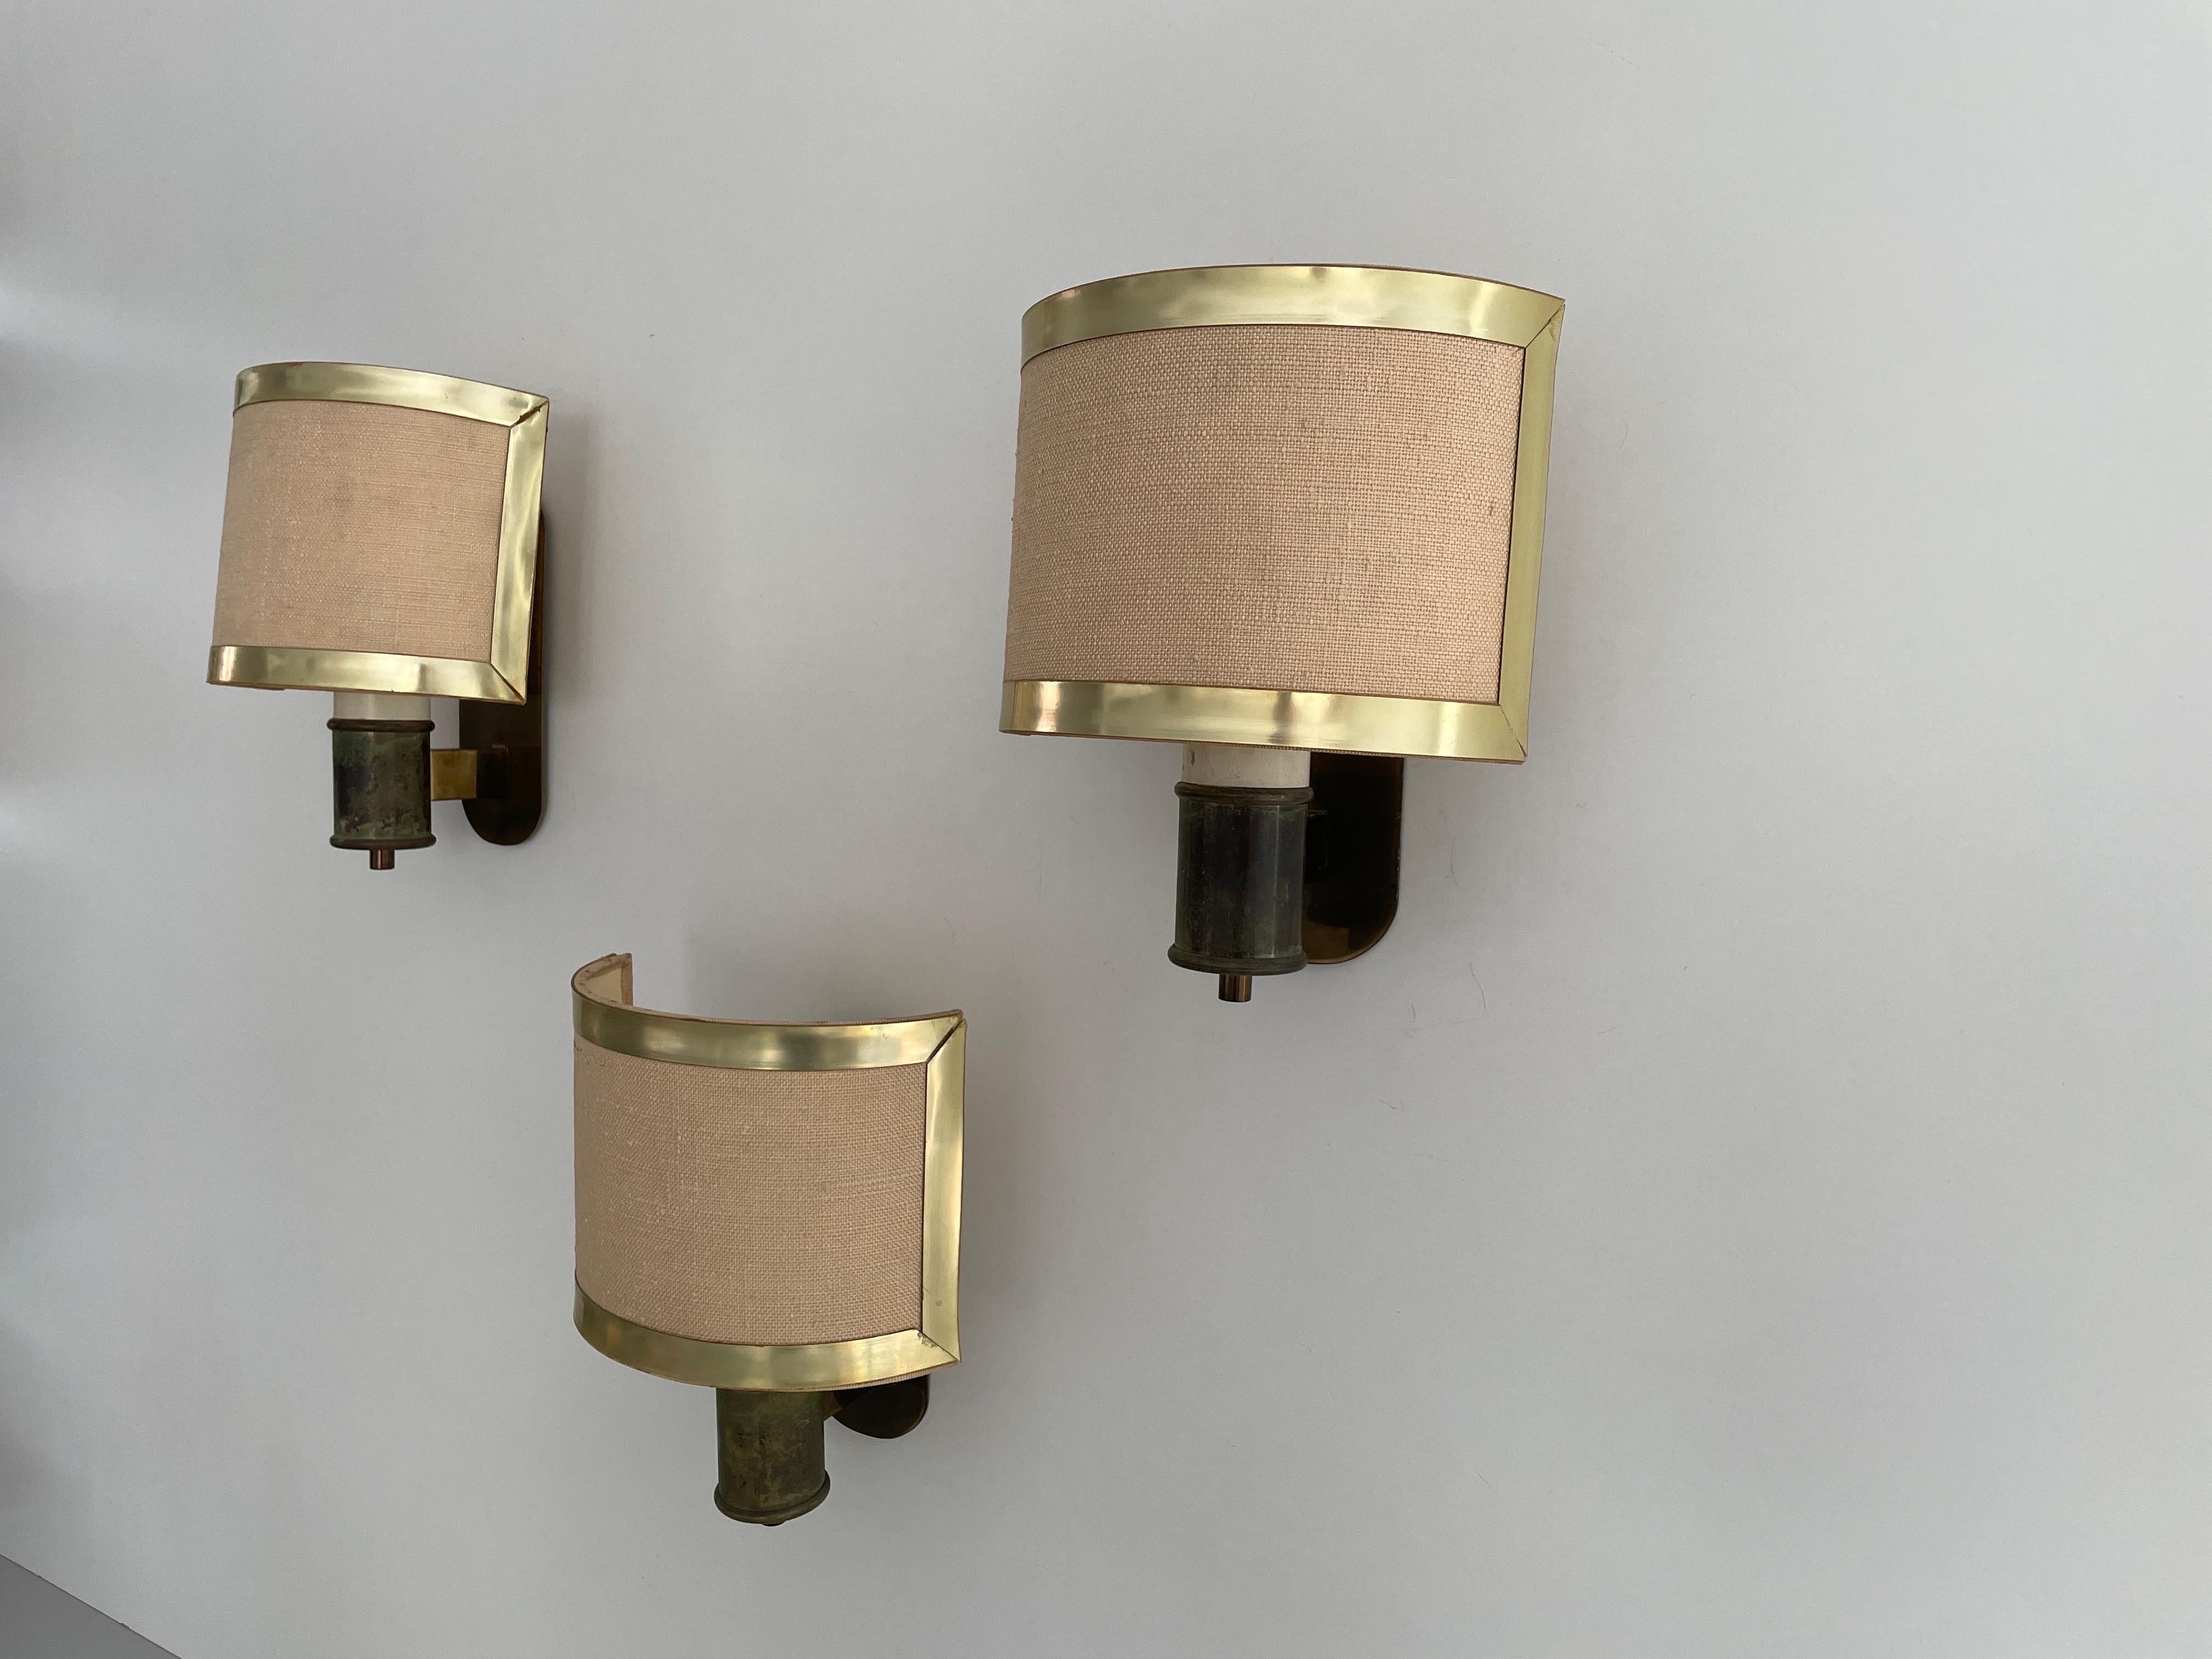 Italian Mid-century Modern Fabric and Brass Set of 3 Sconces, 1960s, Italy For Sale